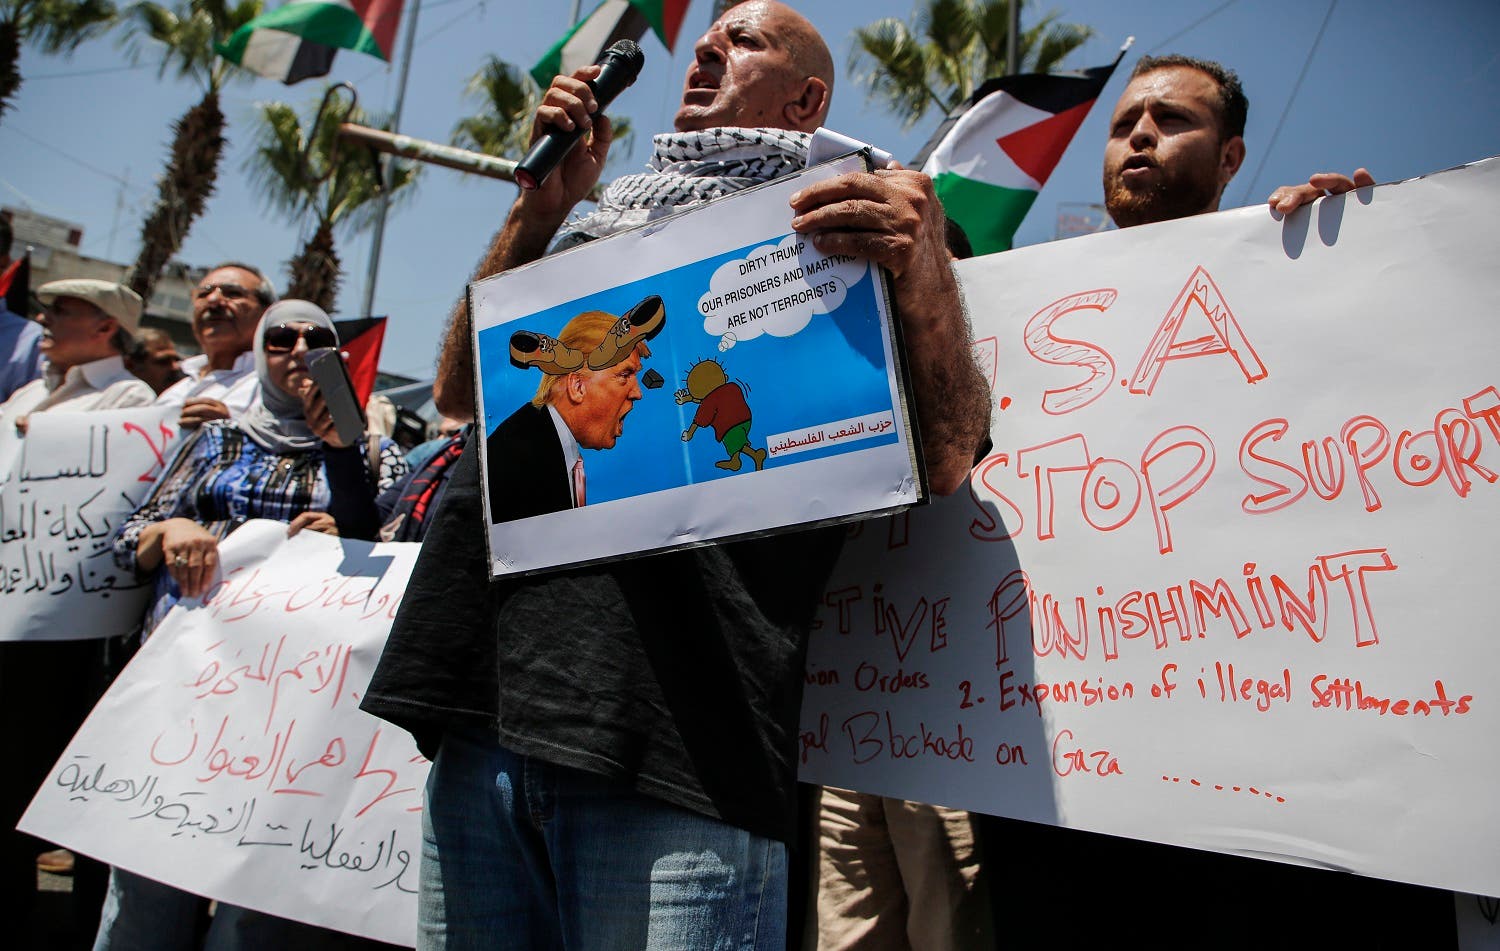 A picture taken on August 24, 2017 in the West Bank city of Ramallah shows Palestinian demonstrators holding a picture of US President Donald J. Trump defaced with cartoon shoes on his head along with other slogans, during a protest against the arrival of a US delegation headed by Jared Kushner. (AFP)